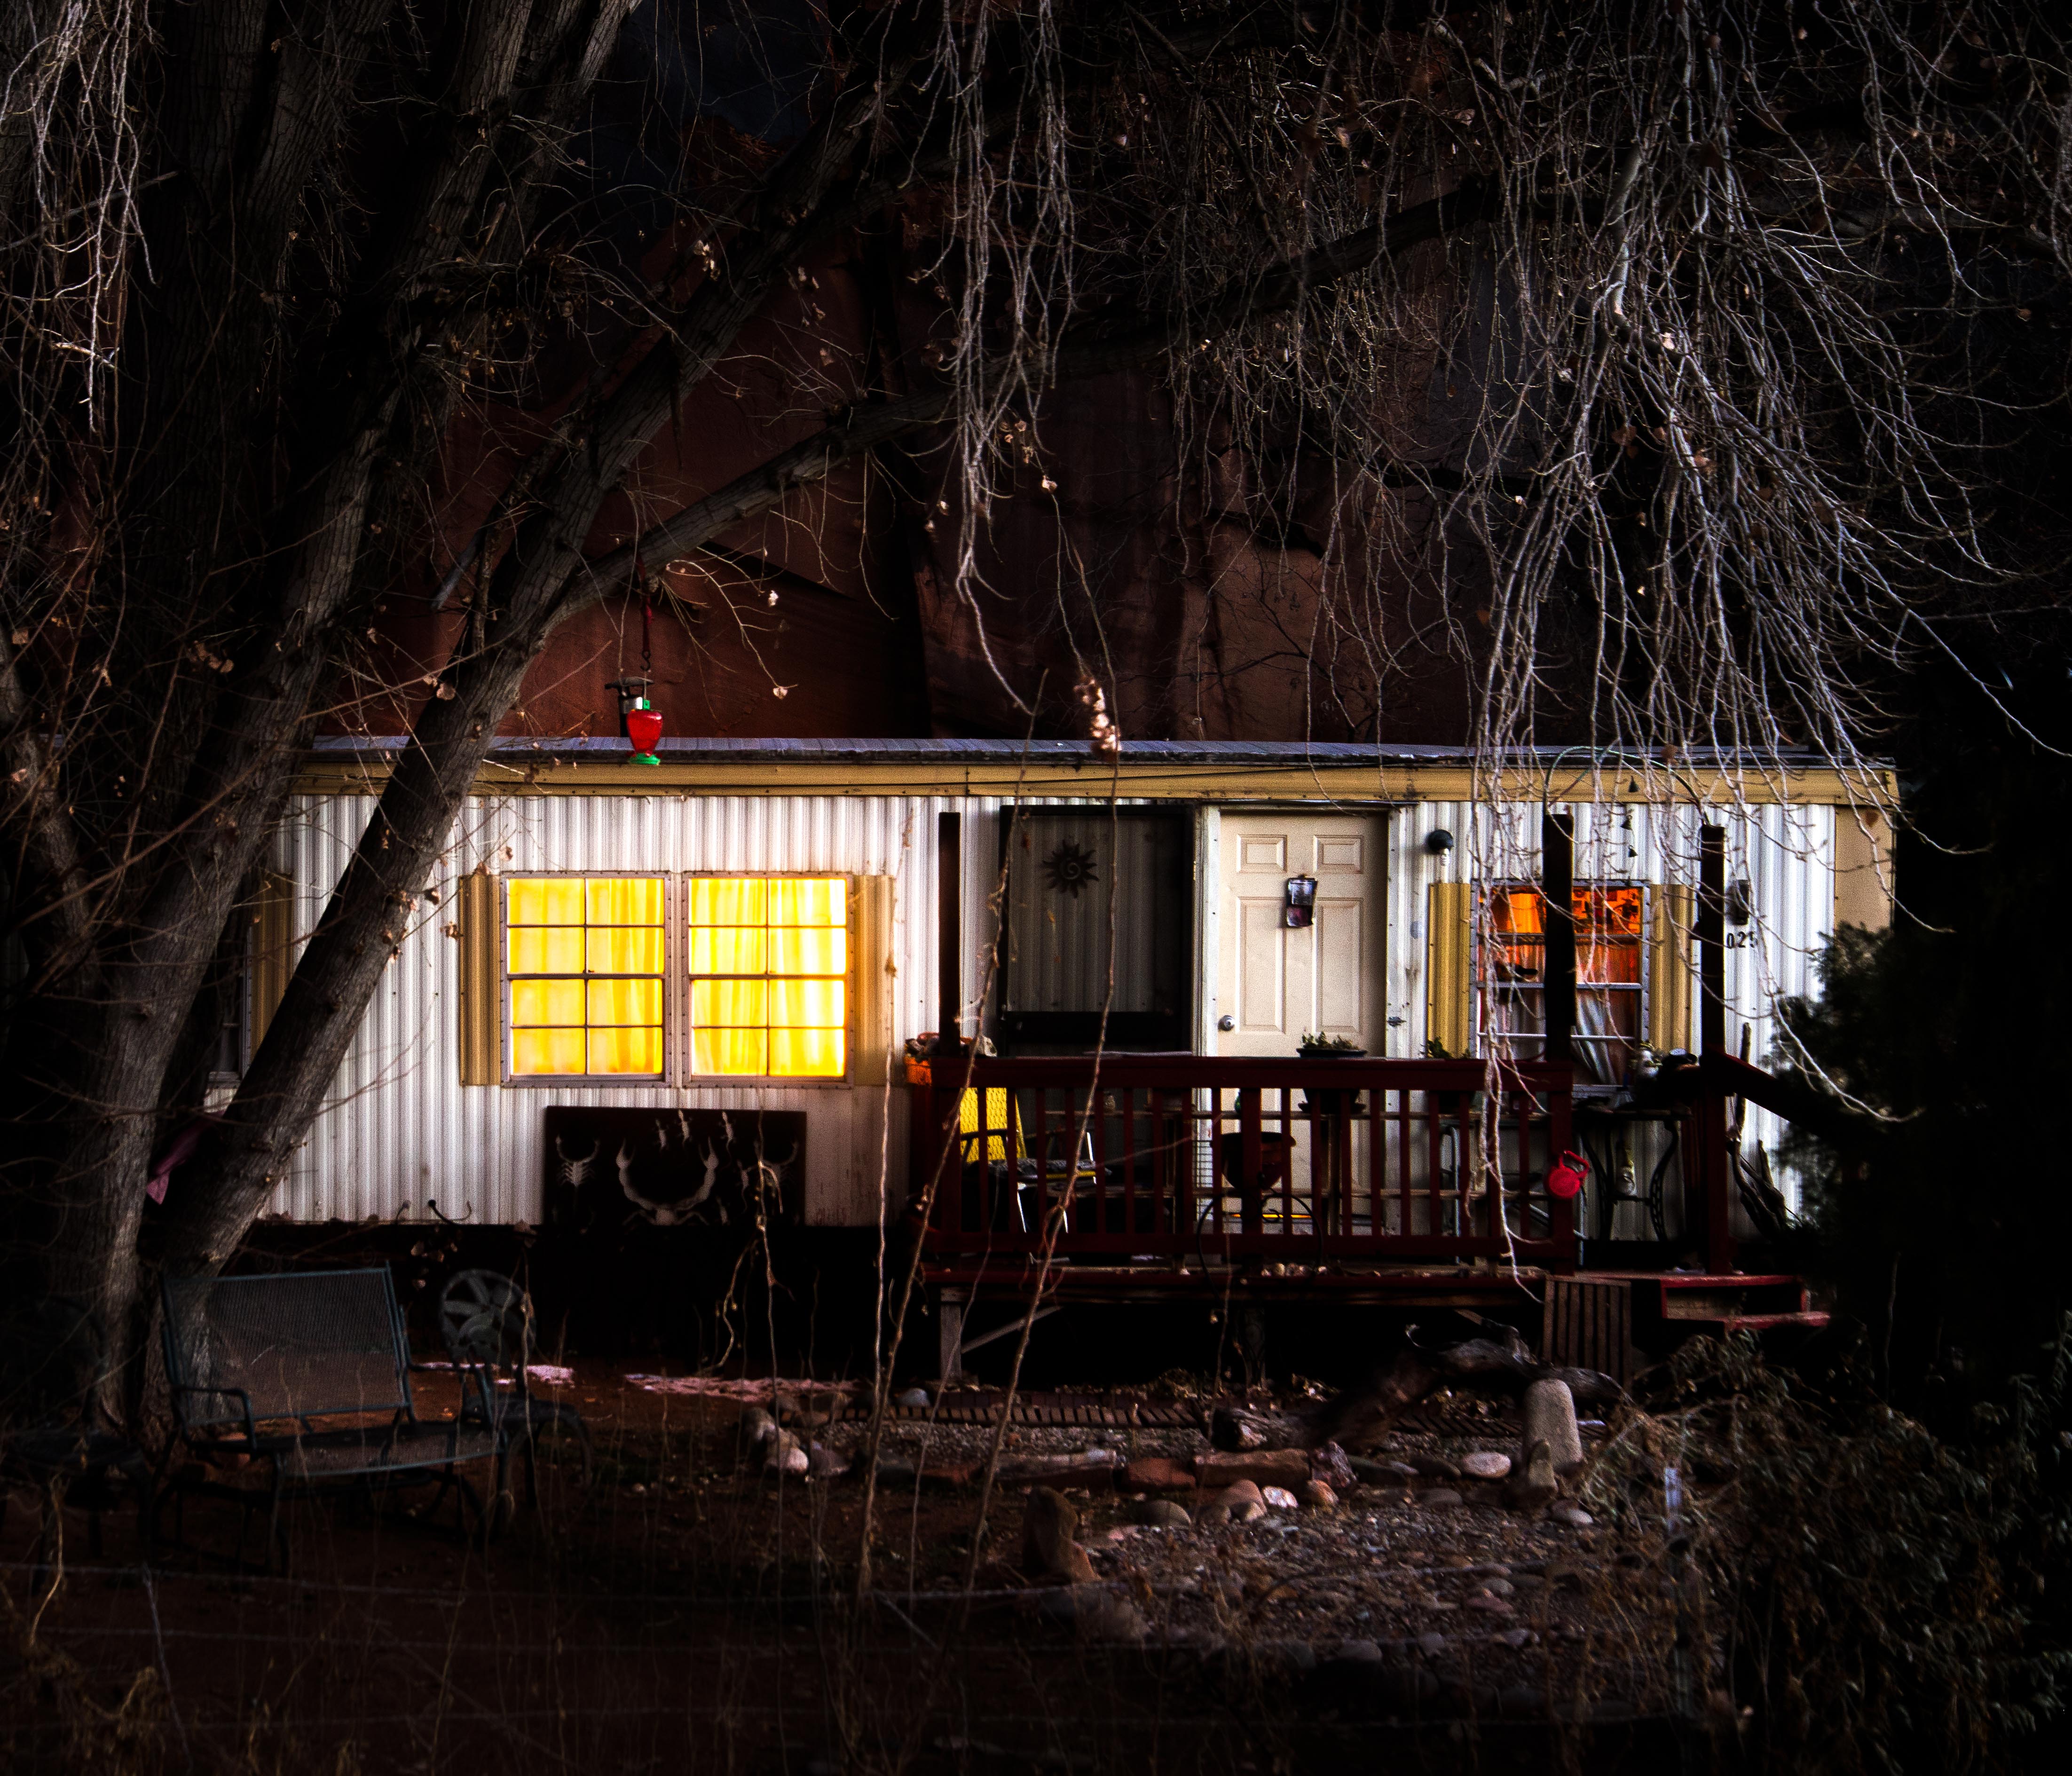 Portfolio, Moss Image Chris Moss, Art, Moss Image, Moab Photographer, mobile home in the dark with trees in front